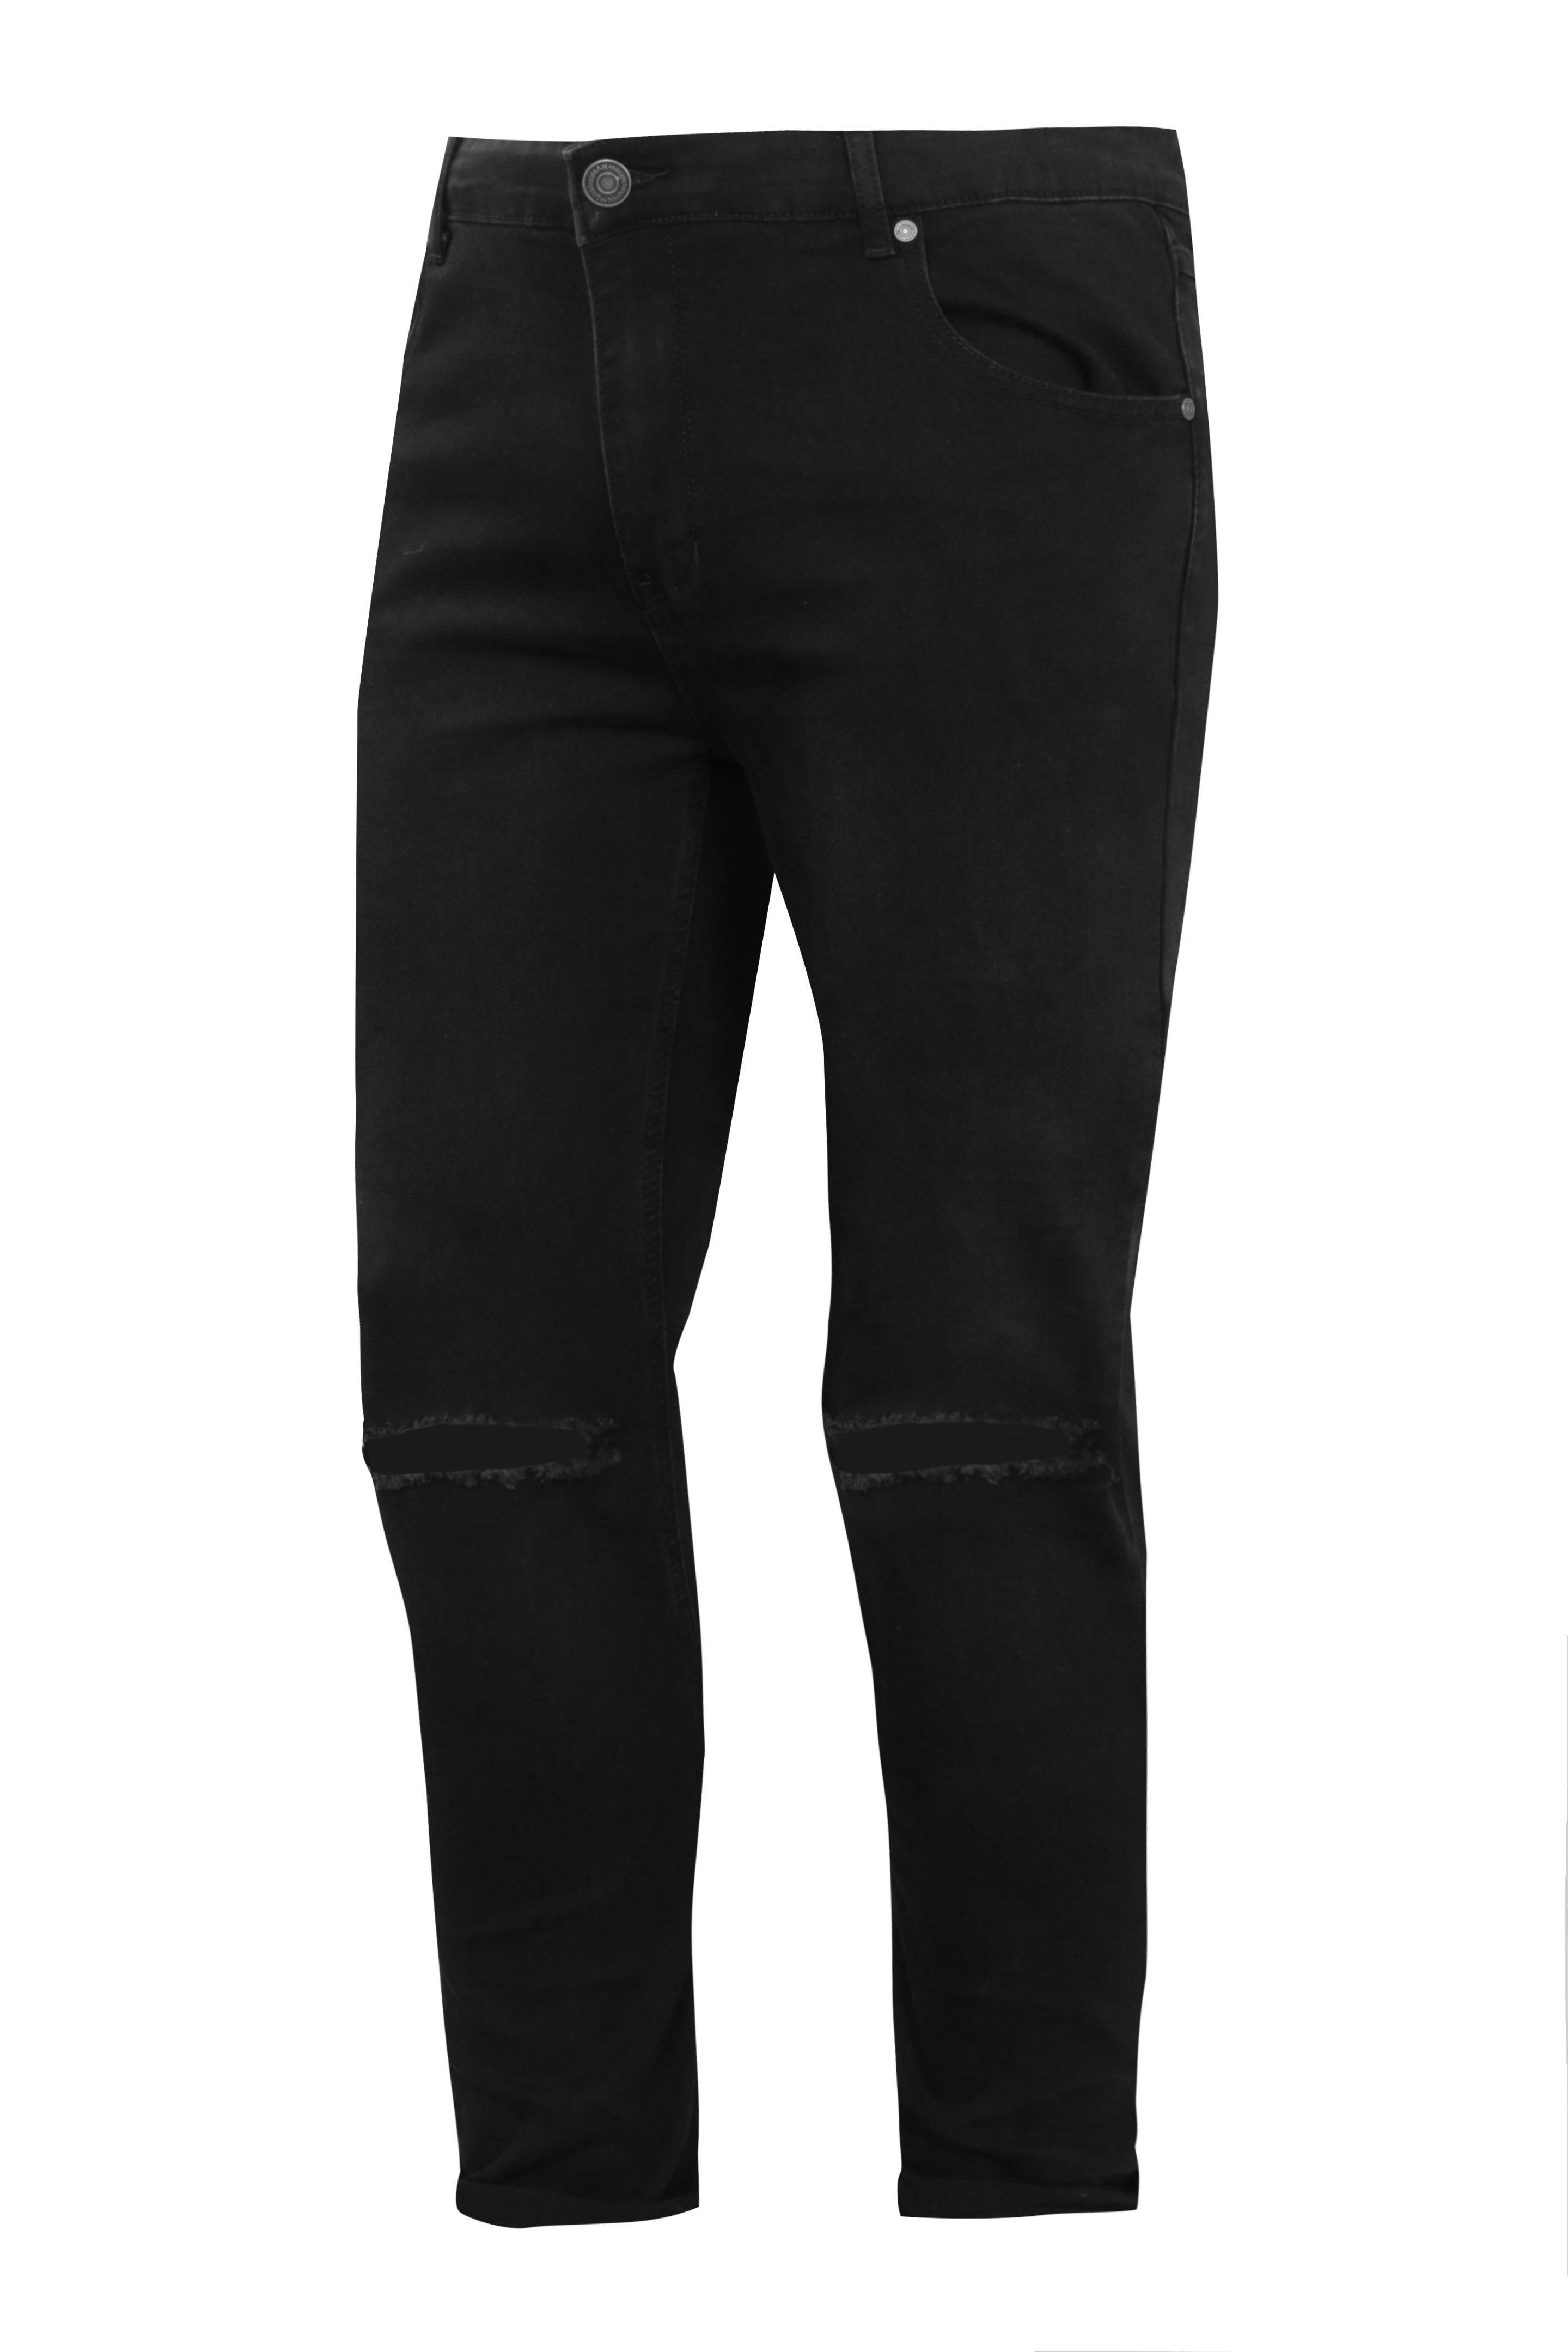 Boohoo Big And Tall Black Ripped Knee Skinny Jeans for Men | Lyst